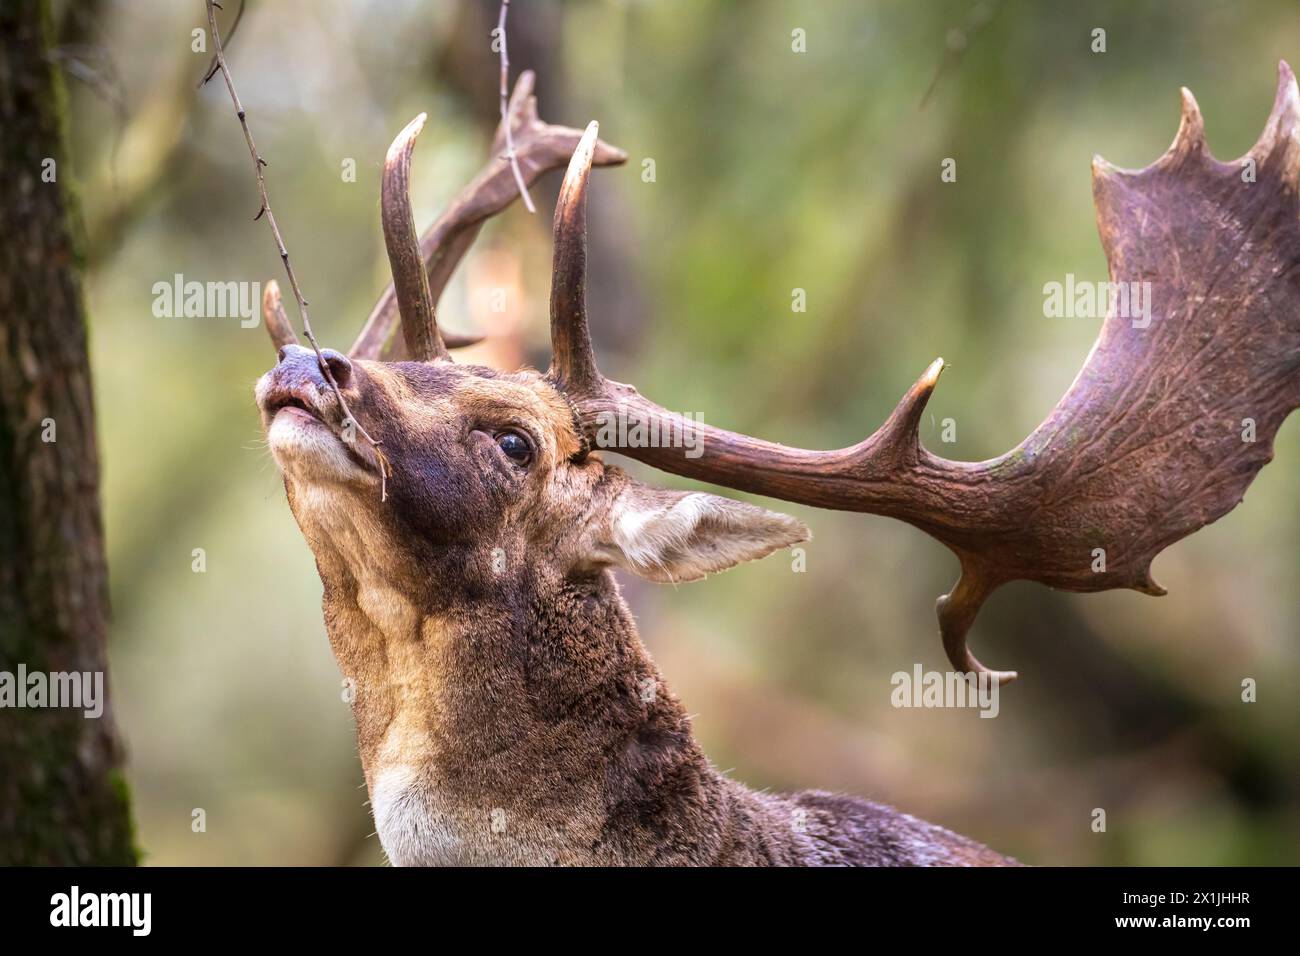 Fallow deer Dama Dama male stag with big antlers during rutting season. The Autumn sunlight and nature colors are clearly visible on the background. Stock Photo